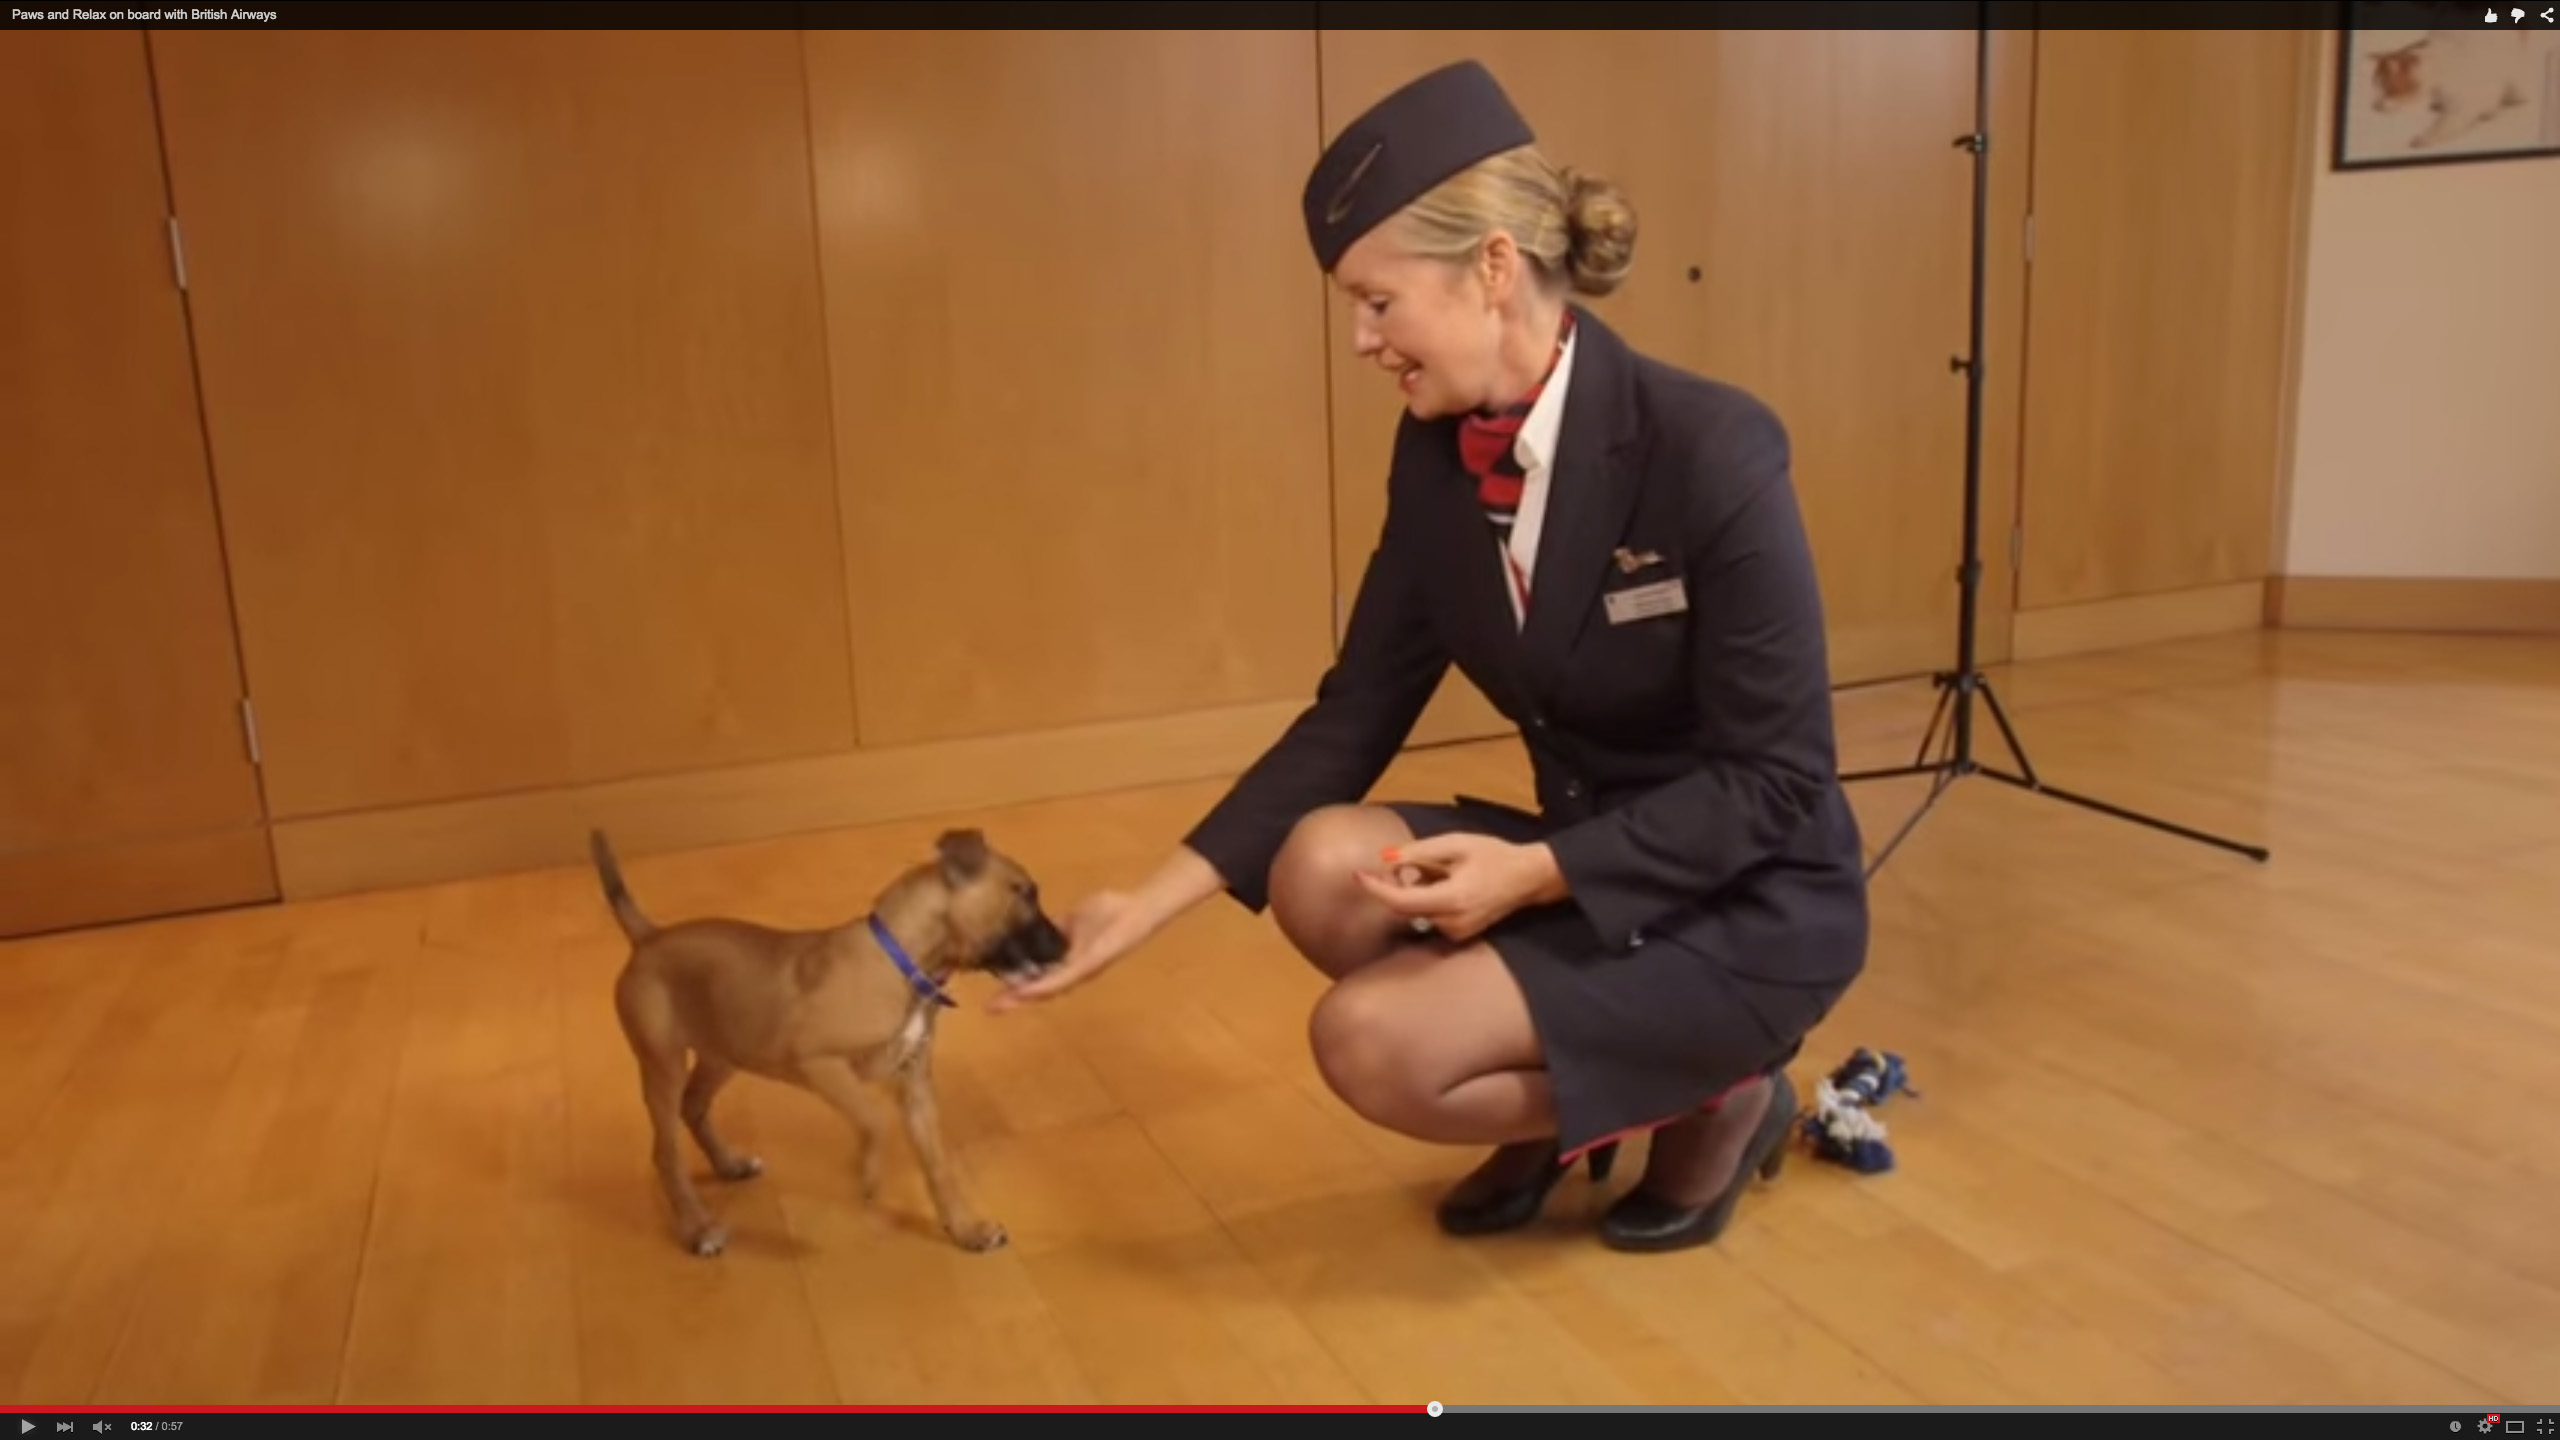 Photo shows an airhostess playing with a dog, which may be a stress-relieving act for people who are flying. 